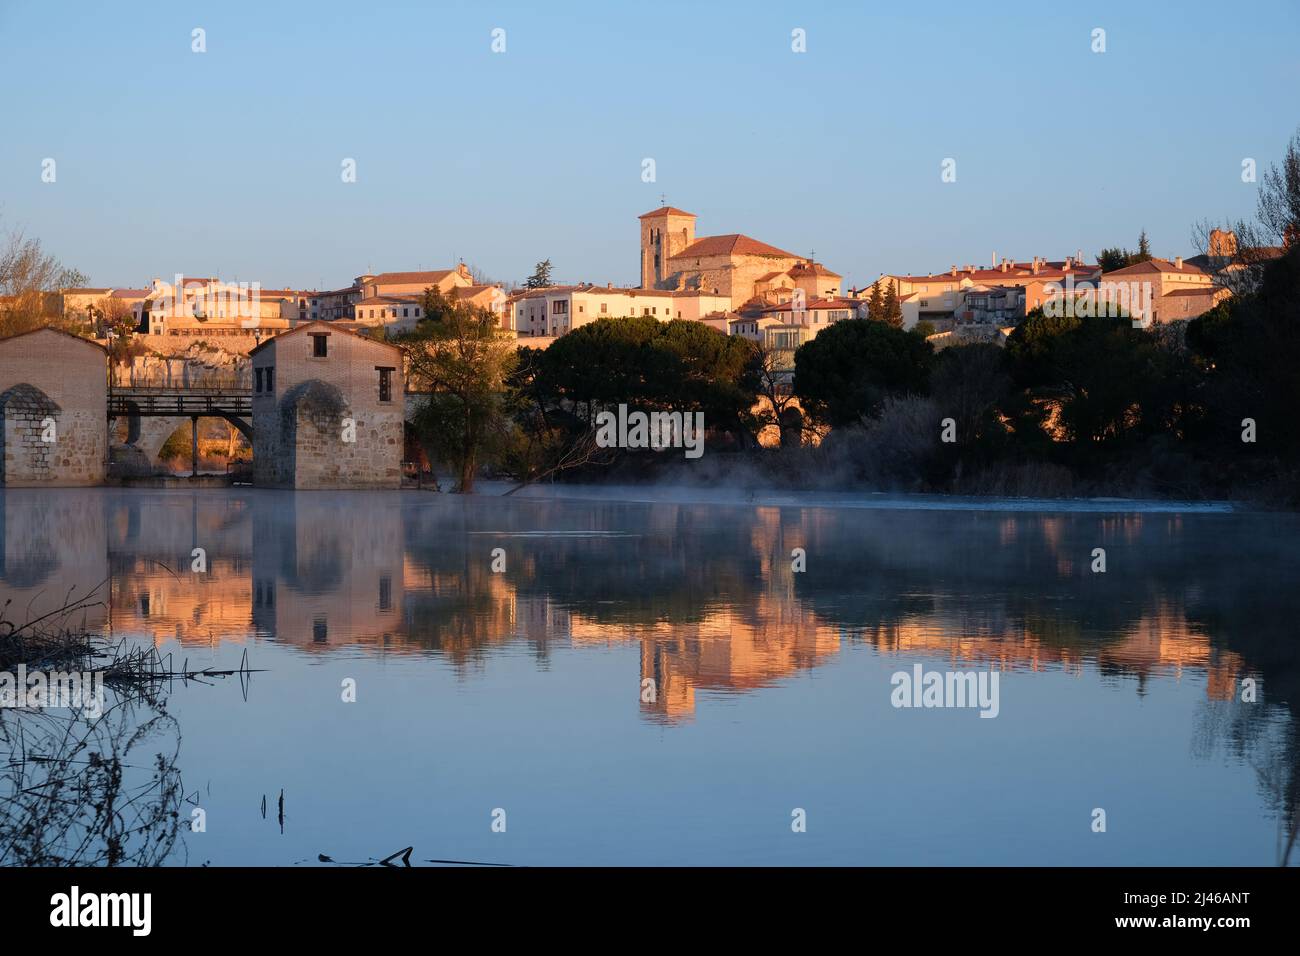 Early morning light on the Romanesque city of Zamora, Castile and León, Spain. View across the River Duero Stock Photo